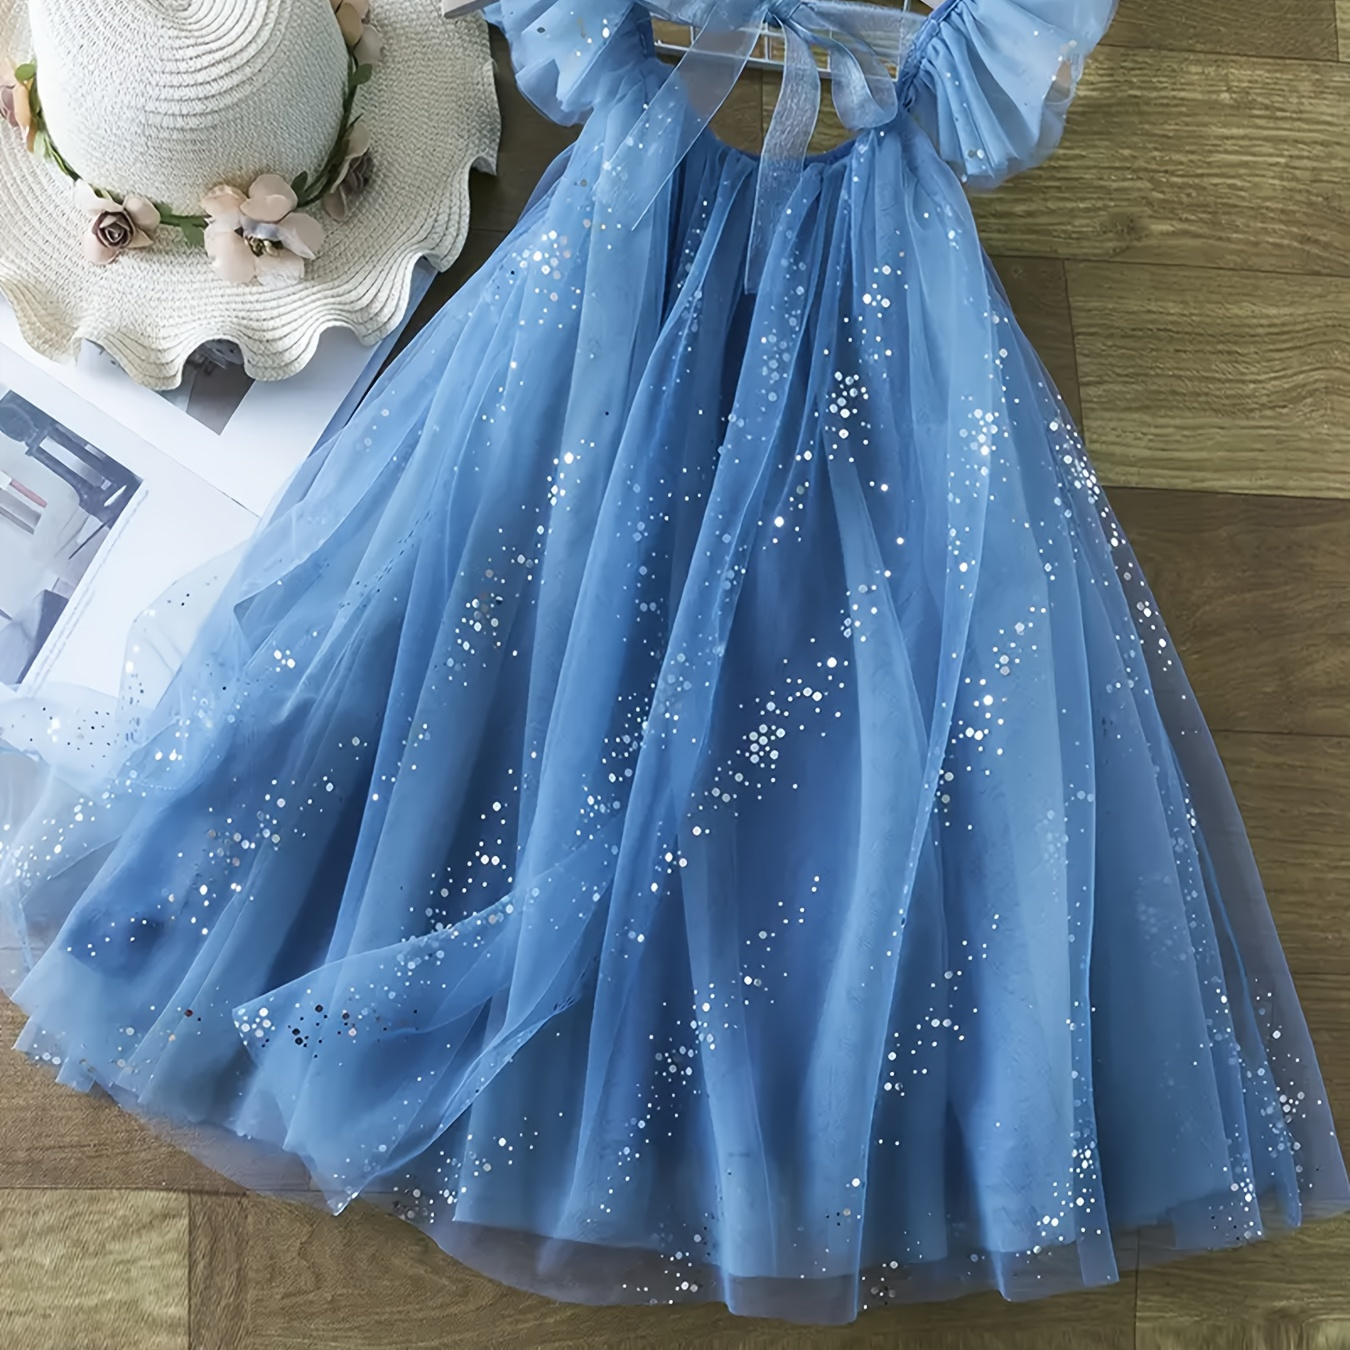 

Dreamy Sequin Tulle Dress Flutter Trim Tutu Dress Mesh Dress For Summer Holiday Party Vacation